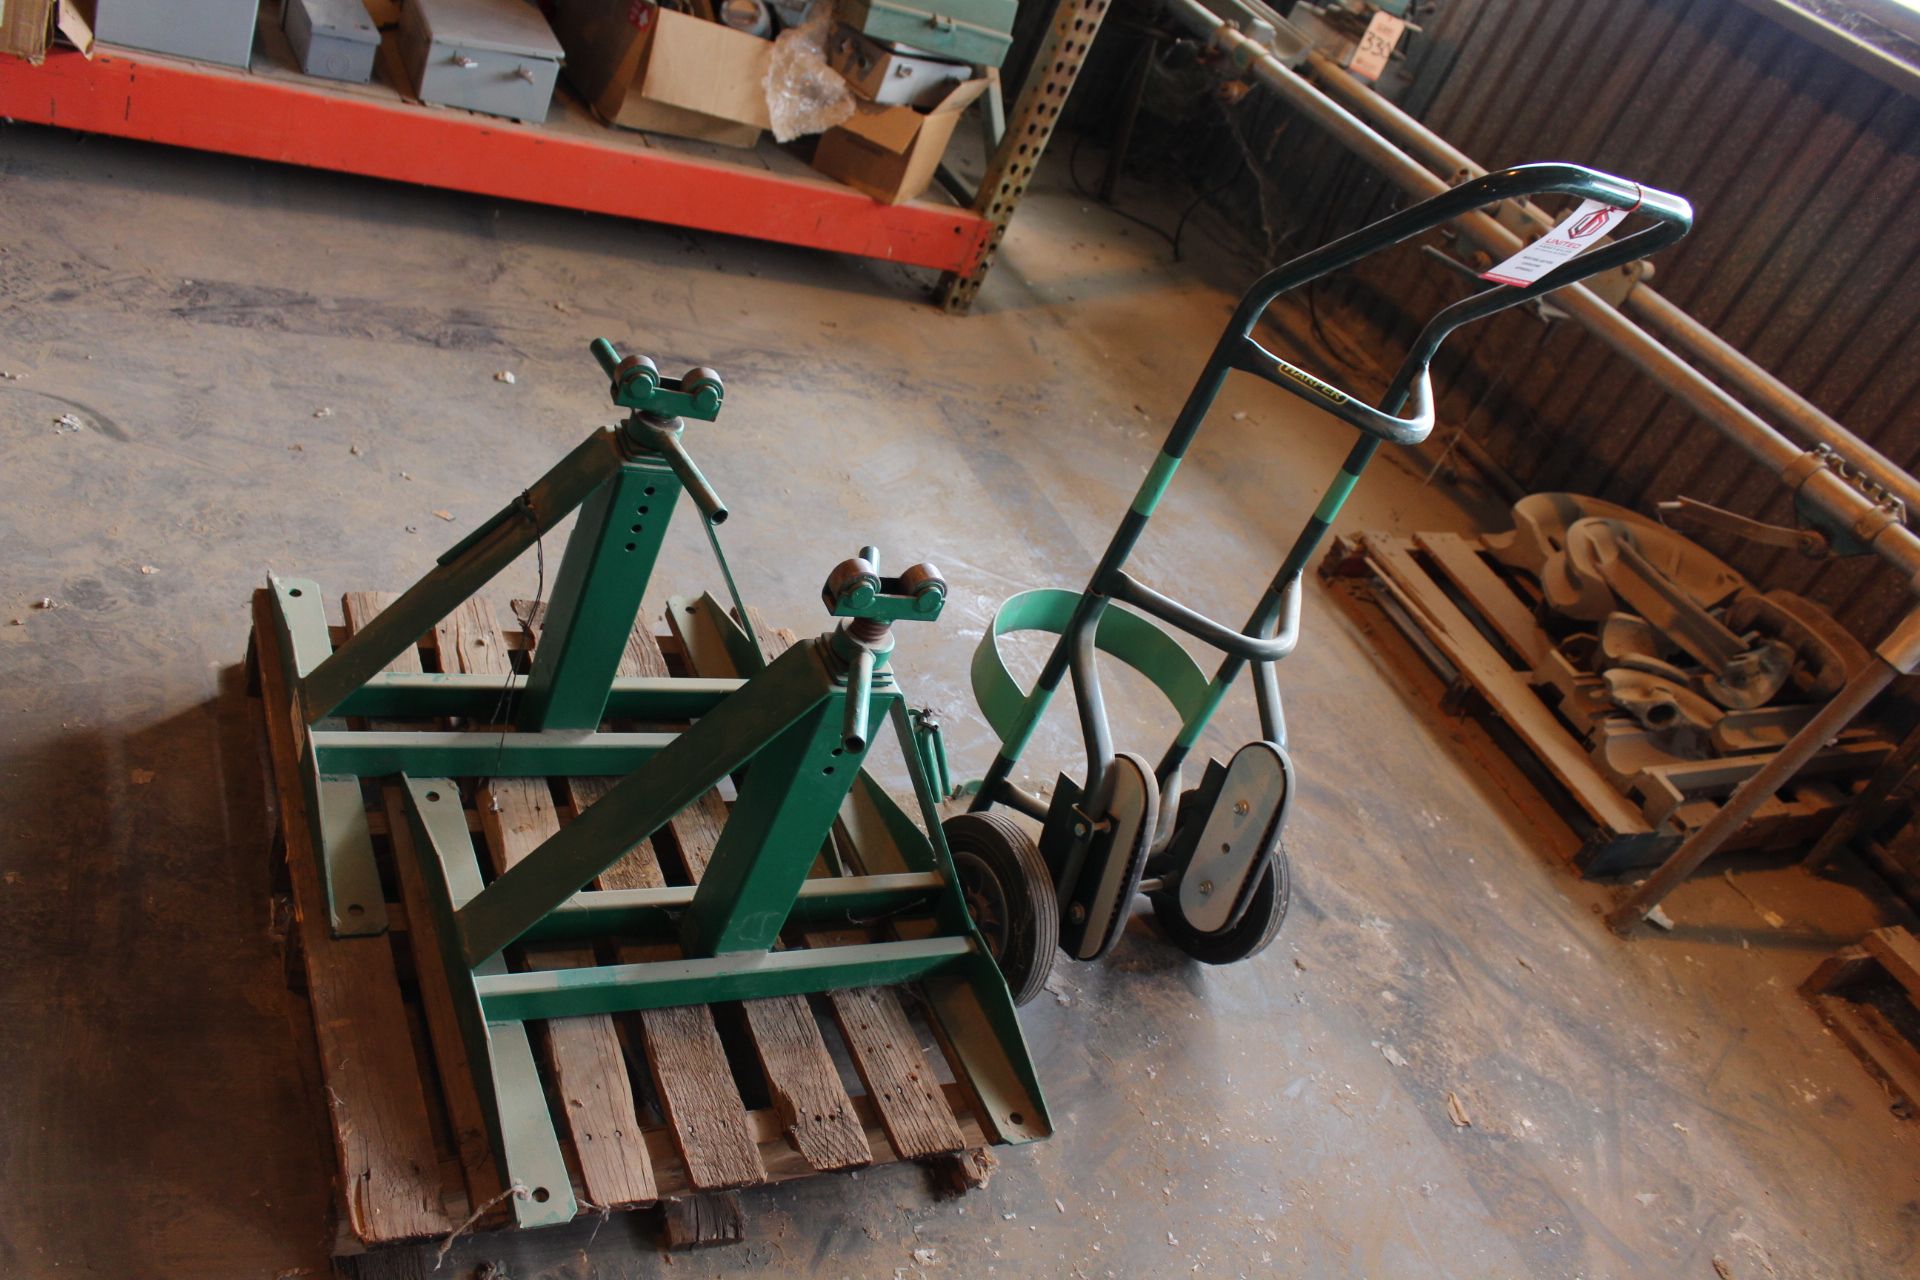 LOT - (2) GREENLEE 683 SCREW-TYPE REEL STANDS AND (1) HARPER CYLINDER DOLLY - Image 2 of 3